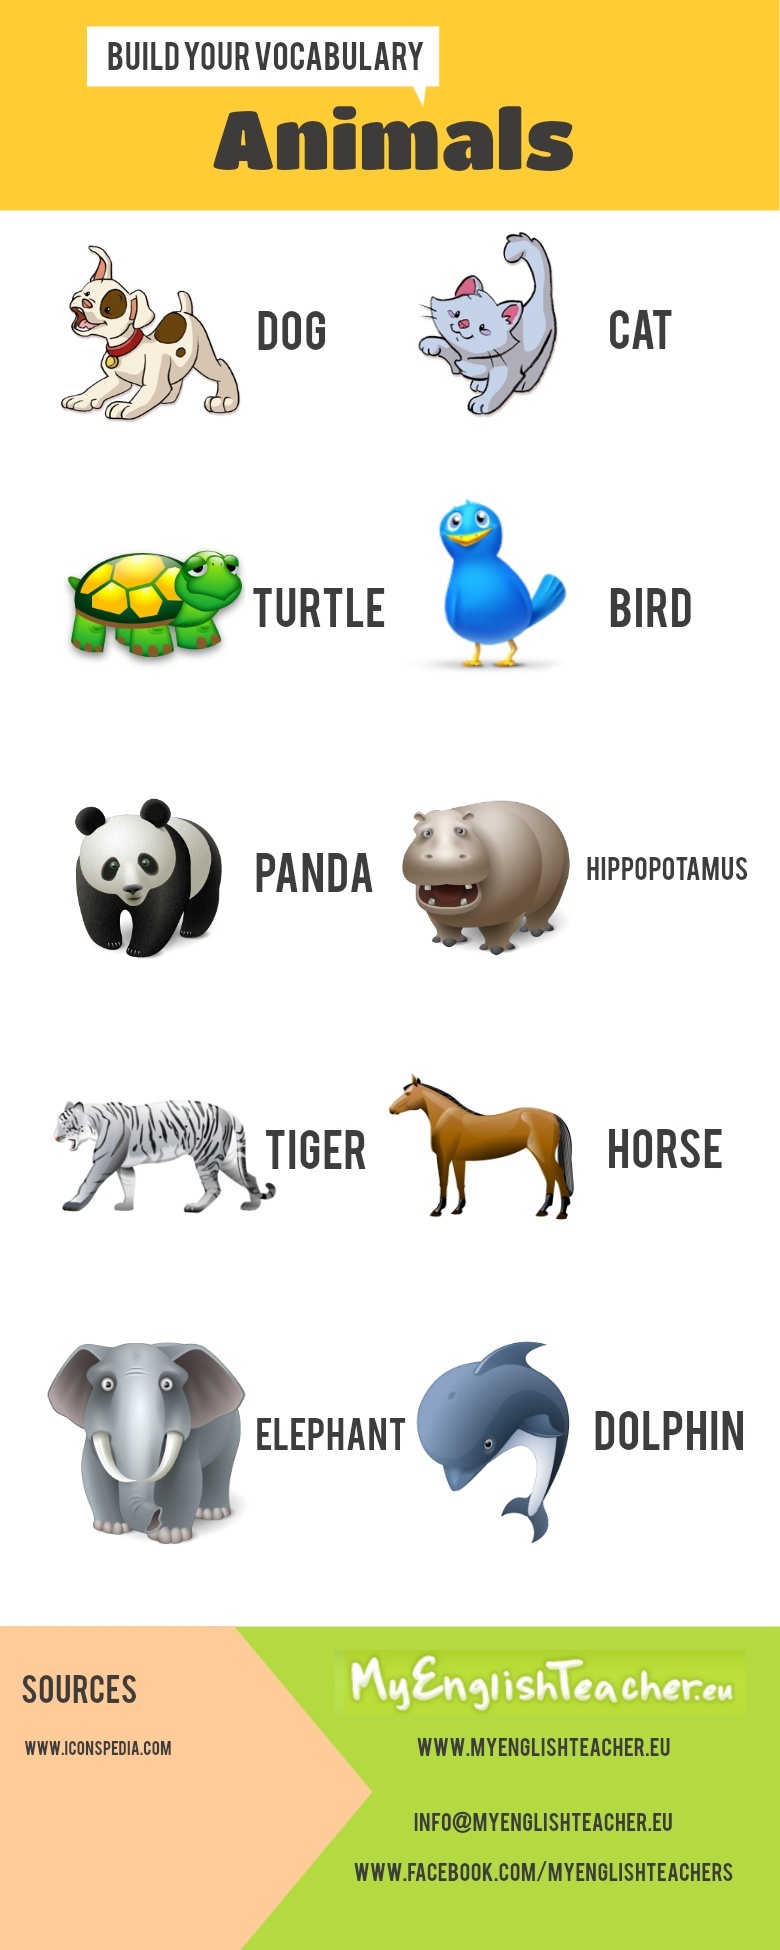 VOCABULARY in pictures - Page 7 Animal10